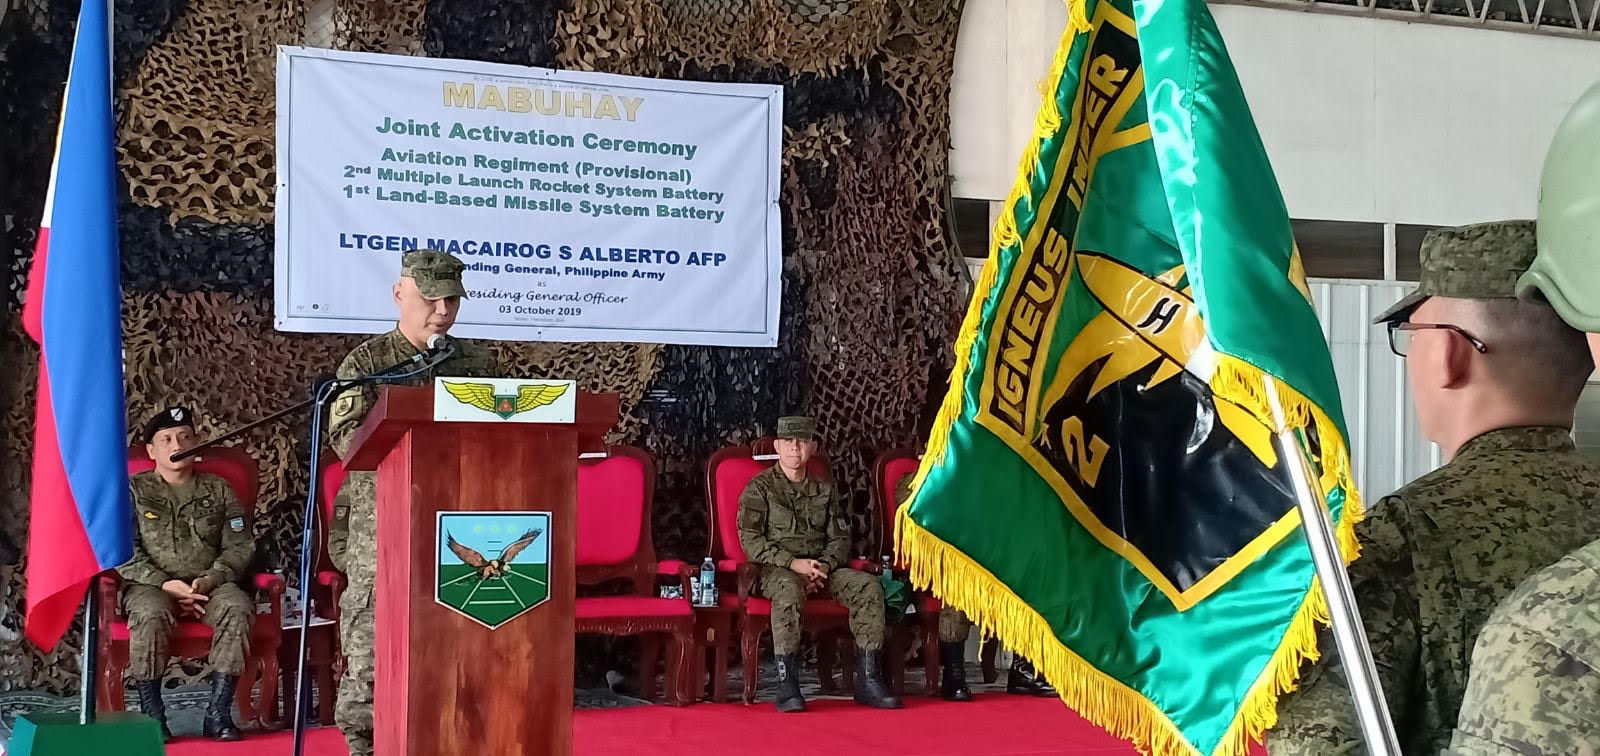 Philippine Army activates the 2nd Multiple Launch Rocket System Battery, along with Army Aviation Regiment and 1st Land-Based Missile System Battery 